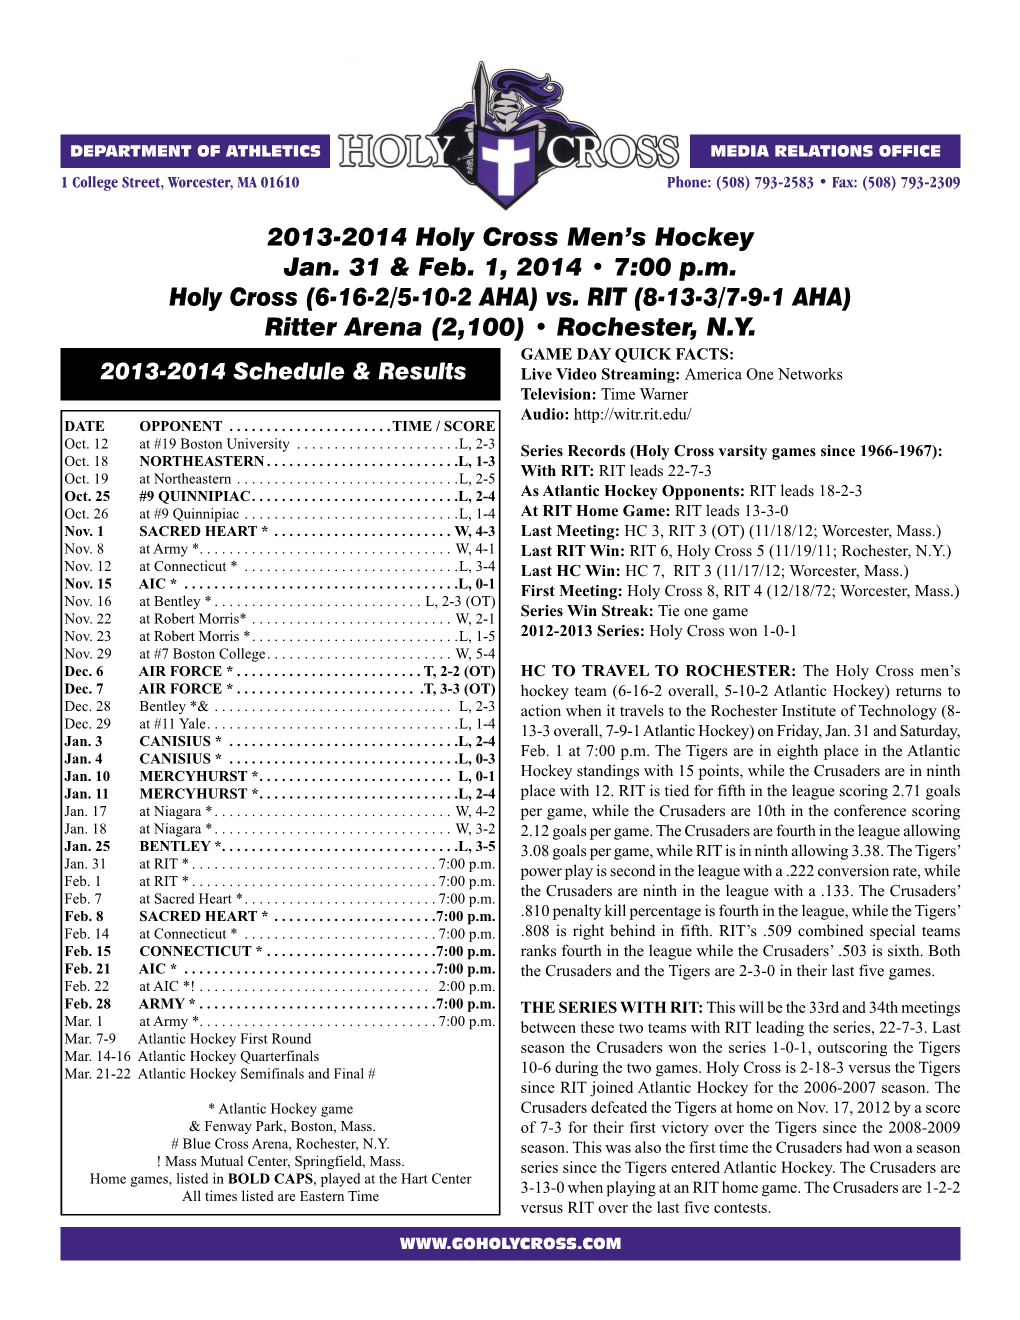 Holy Cross Game Notes